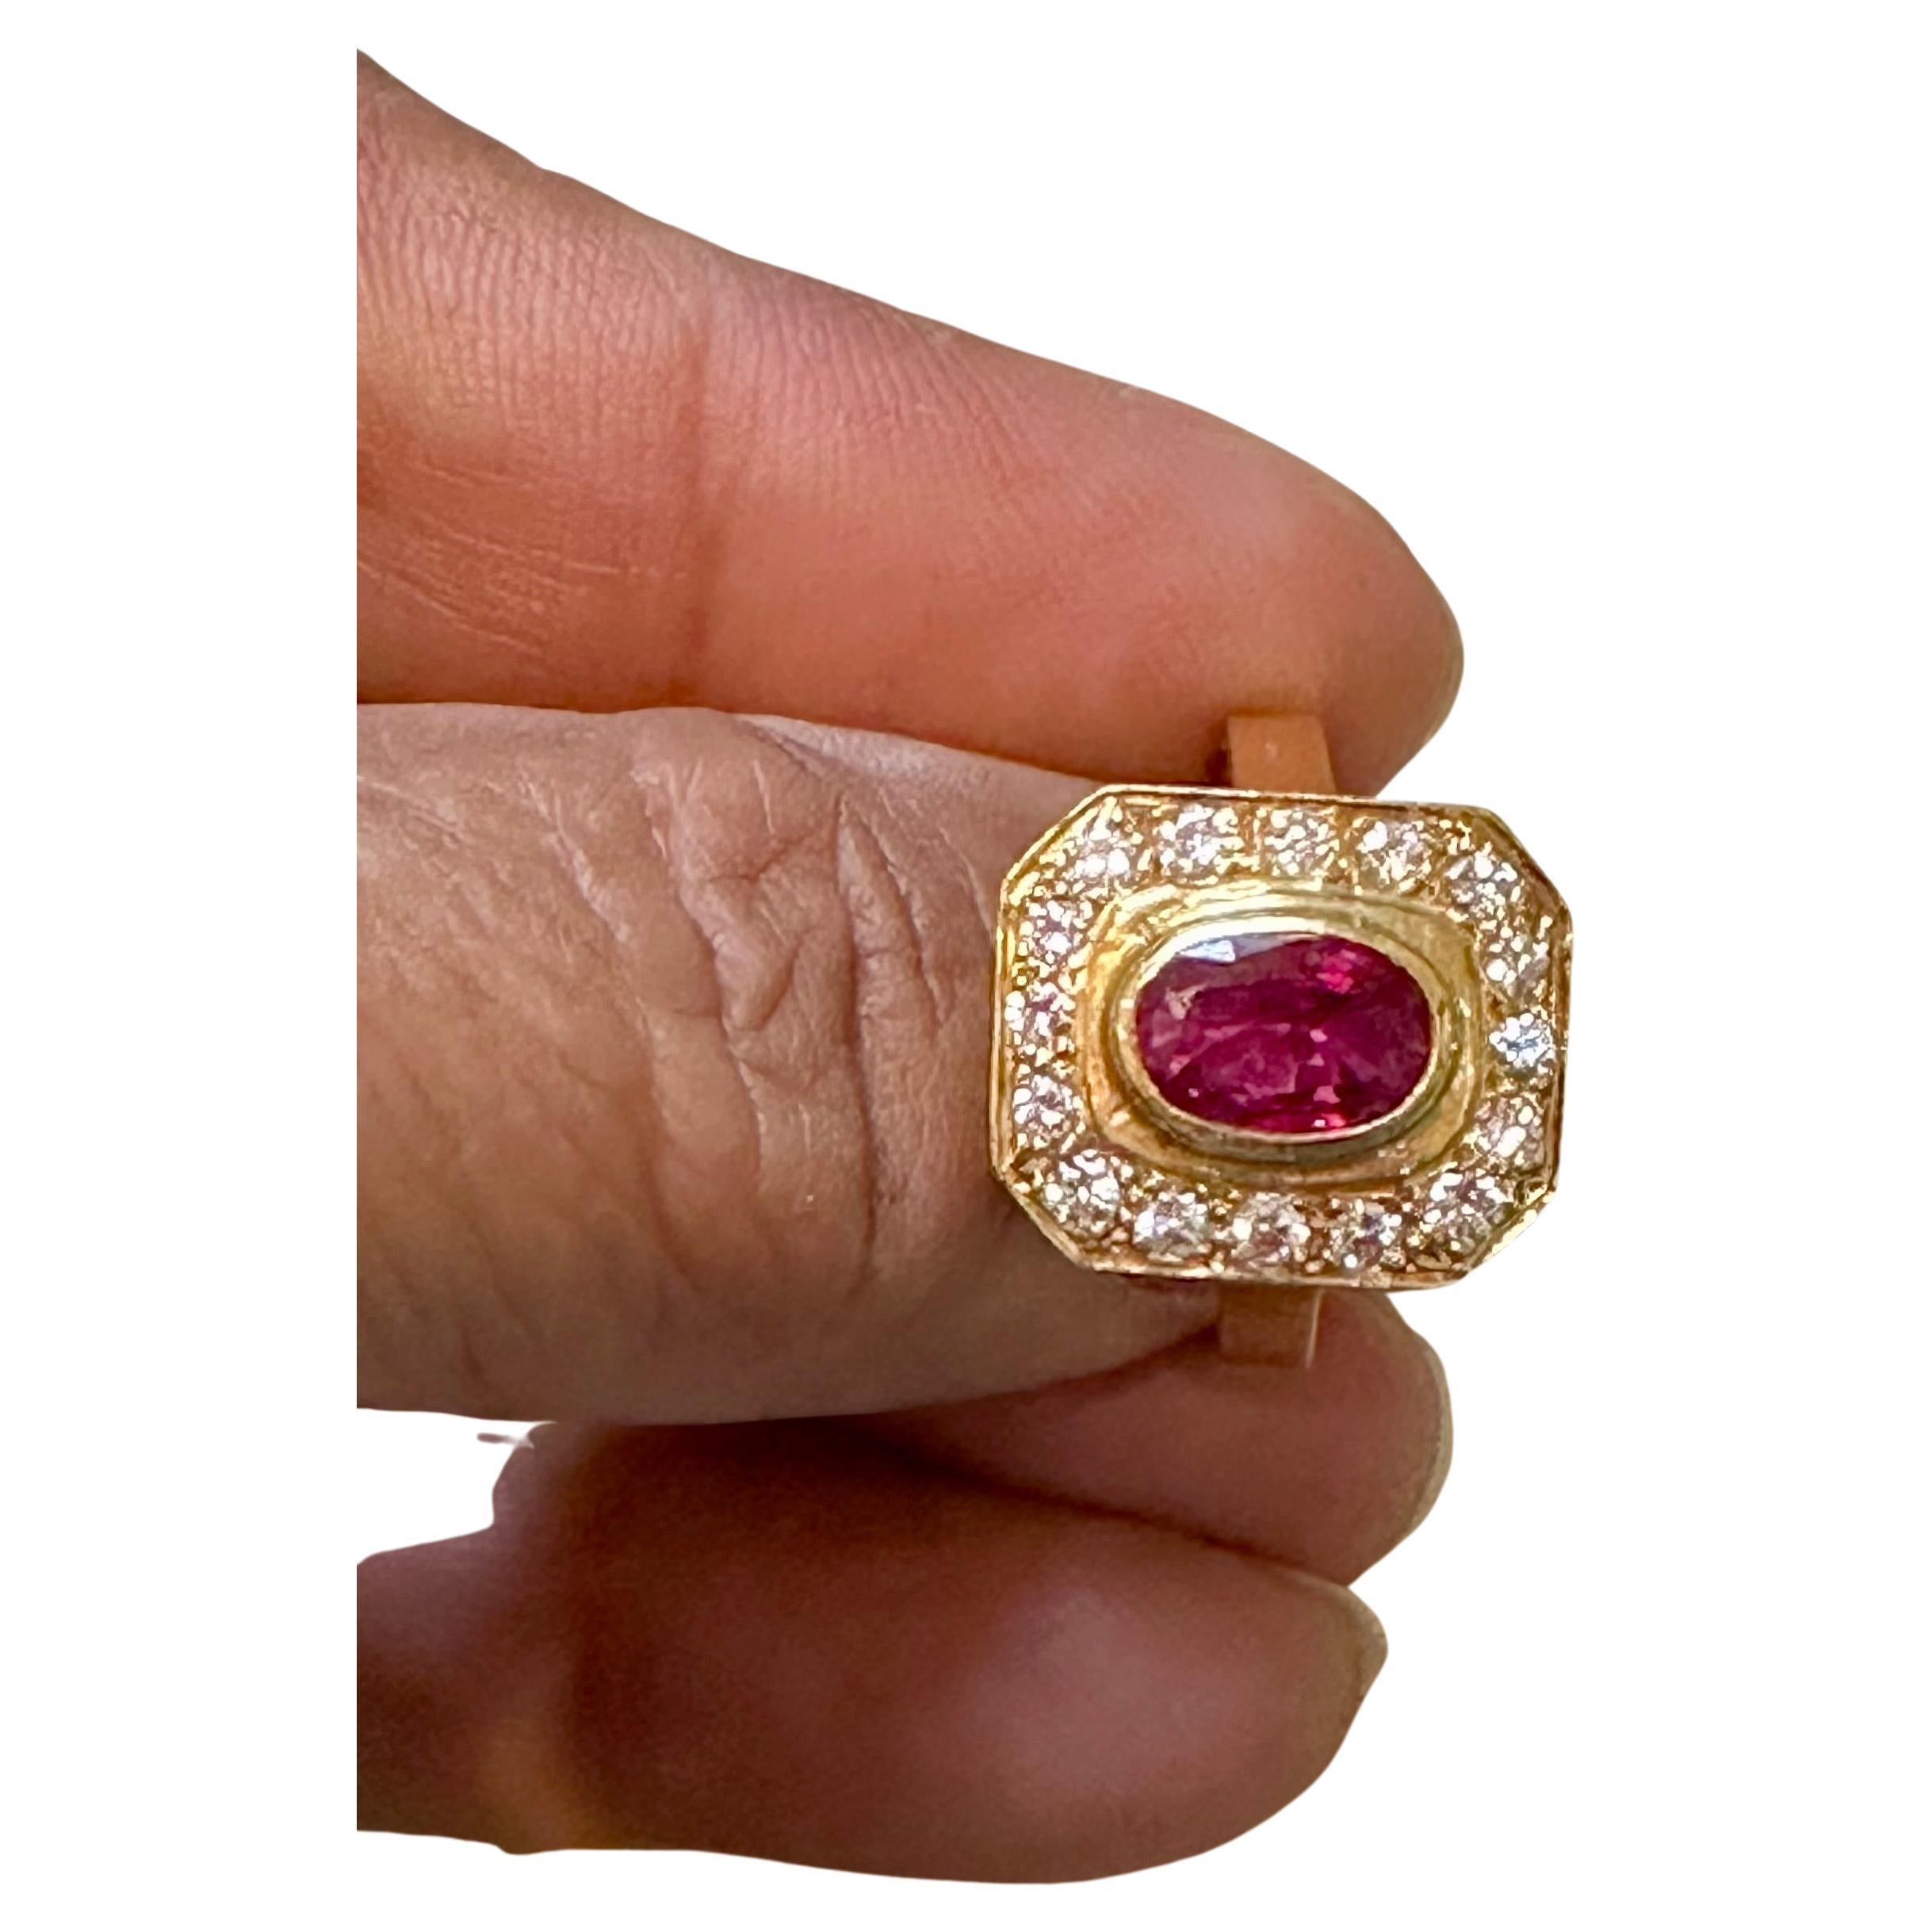 Introducing our exquisite 18 Karat Gold Ring, featuring a stunning 1.4 carat natural oval Ruby and approximately 0.80 carats of round brilliant cut diamonds. This ring is a true testament to beauty and elegance.

The natural Ruby in this ring is of